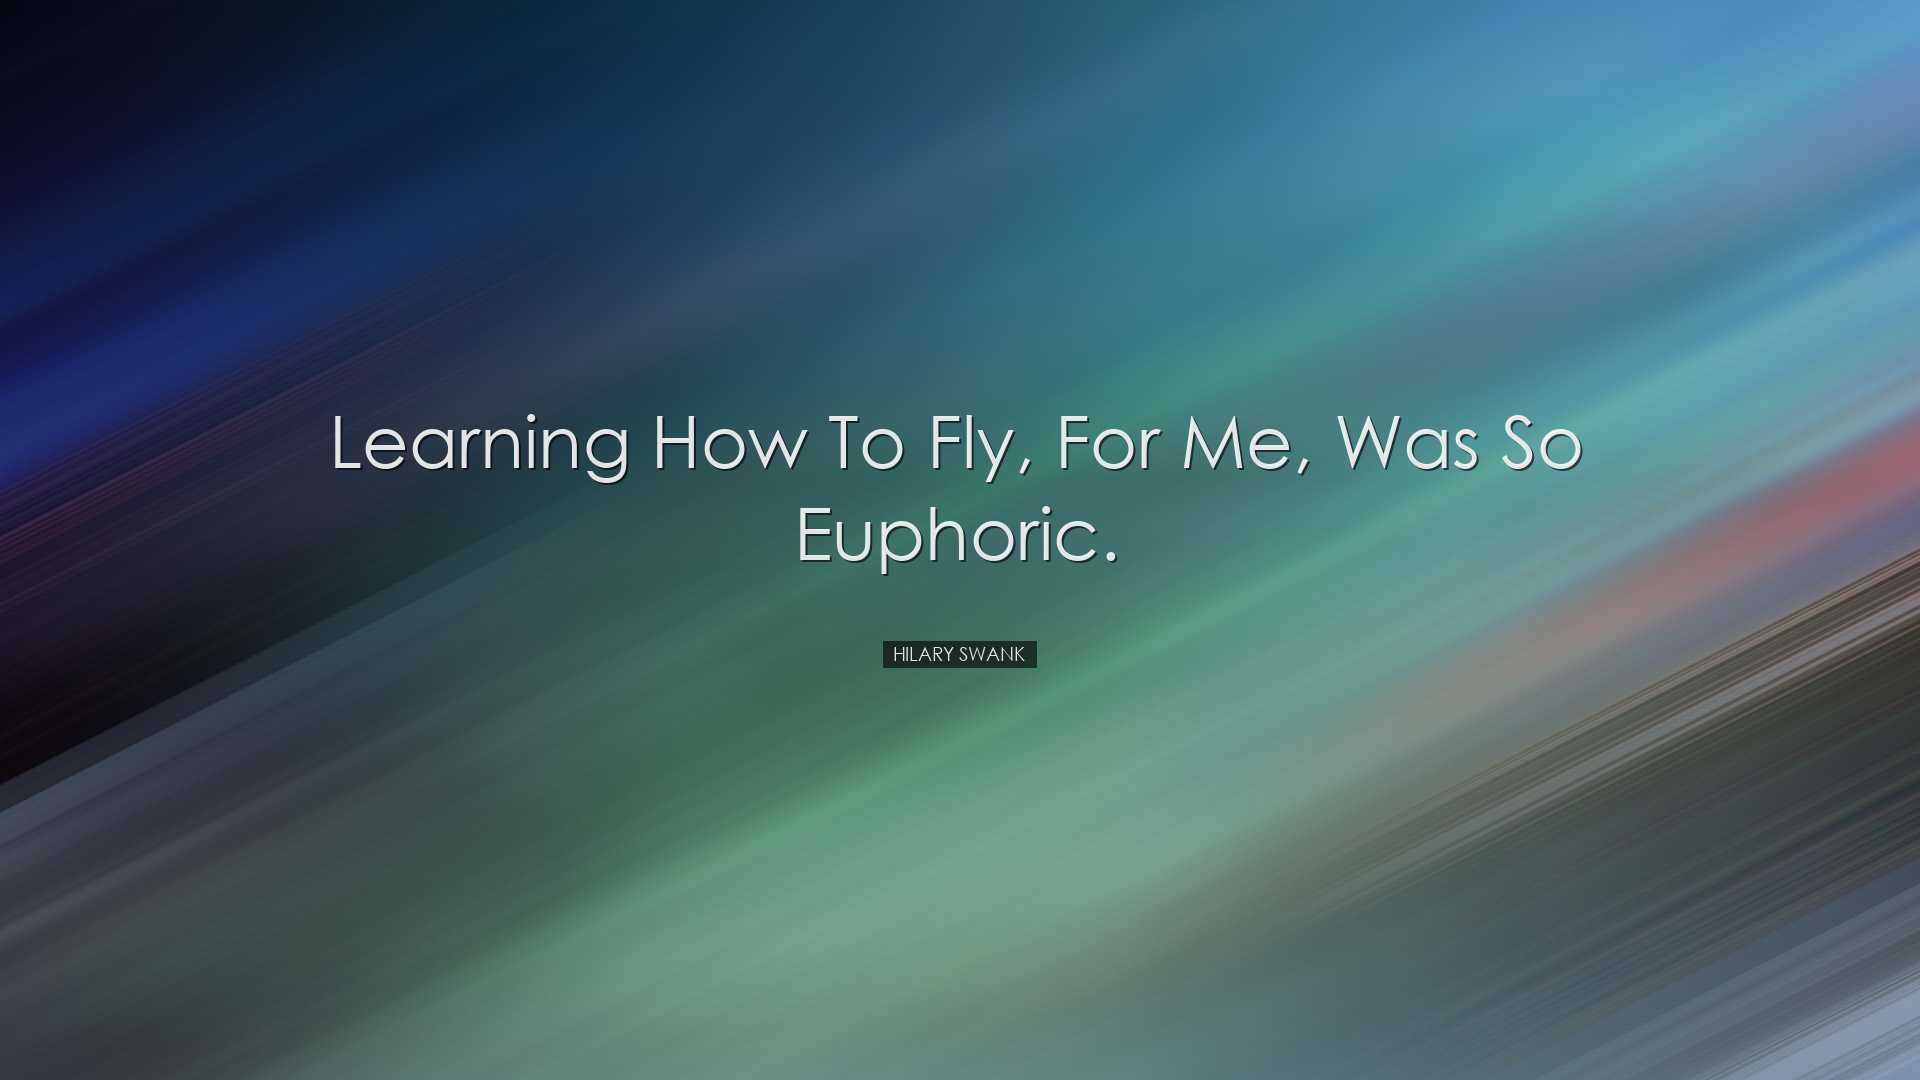 Learning how to fly, for me, was so euphoric. - Hilary Swank